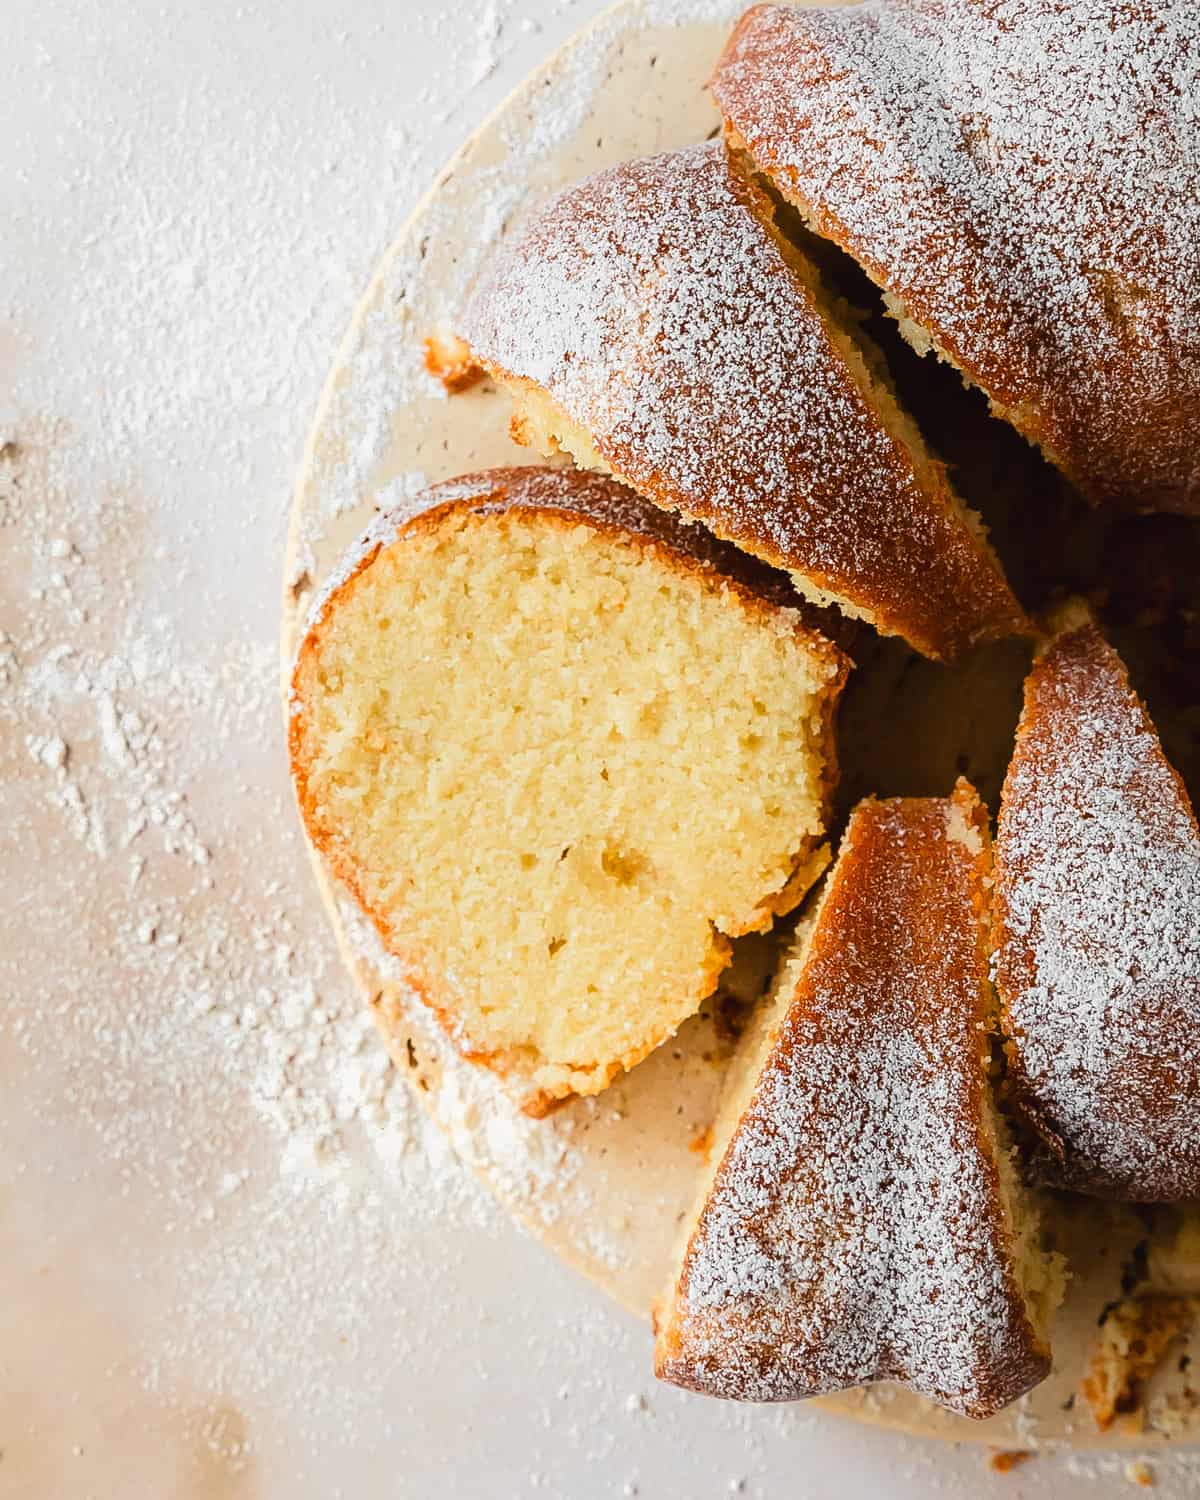 Buttermilk pound cake is an old fashioned, buttery vanilla pound cake with a moist and tender crumb. Top with this simple buttermilk bundt cake with a light dusting of powdered sugar and fresh fruit. It’s the perfect easy to make and flavorful dessert everyone will love. 